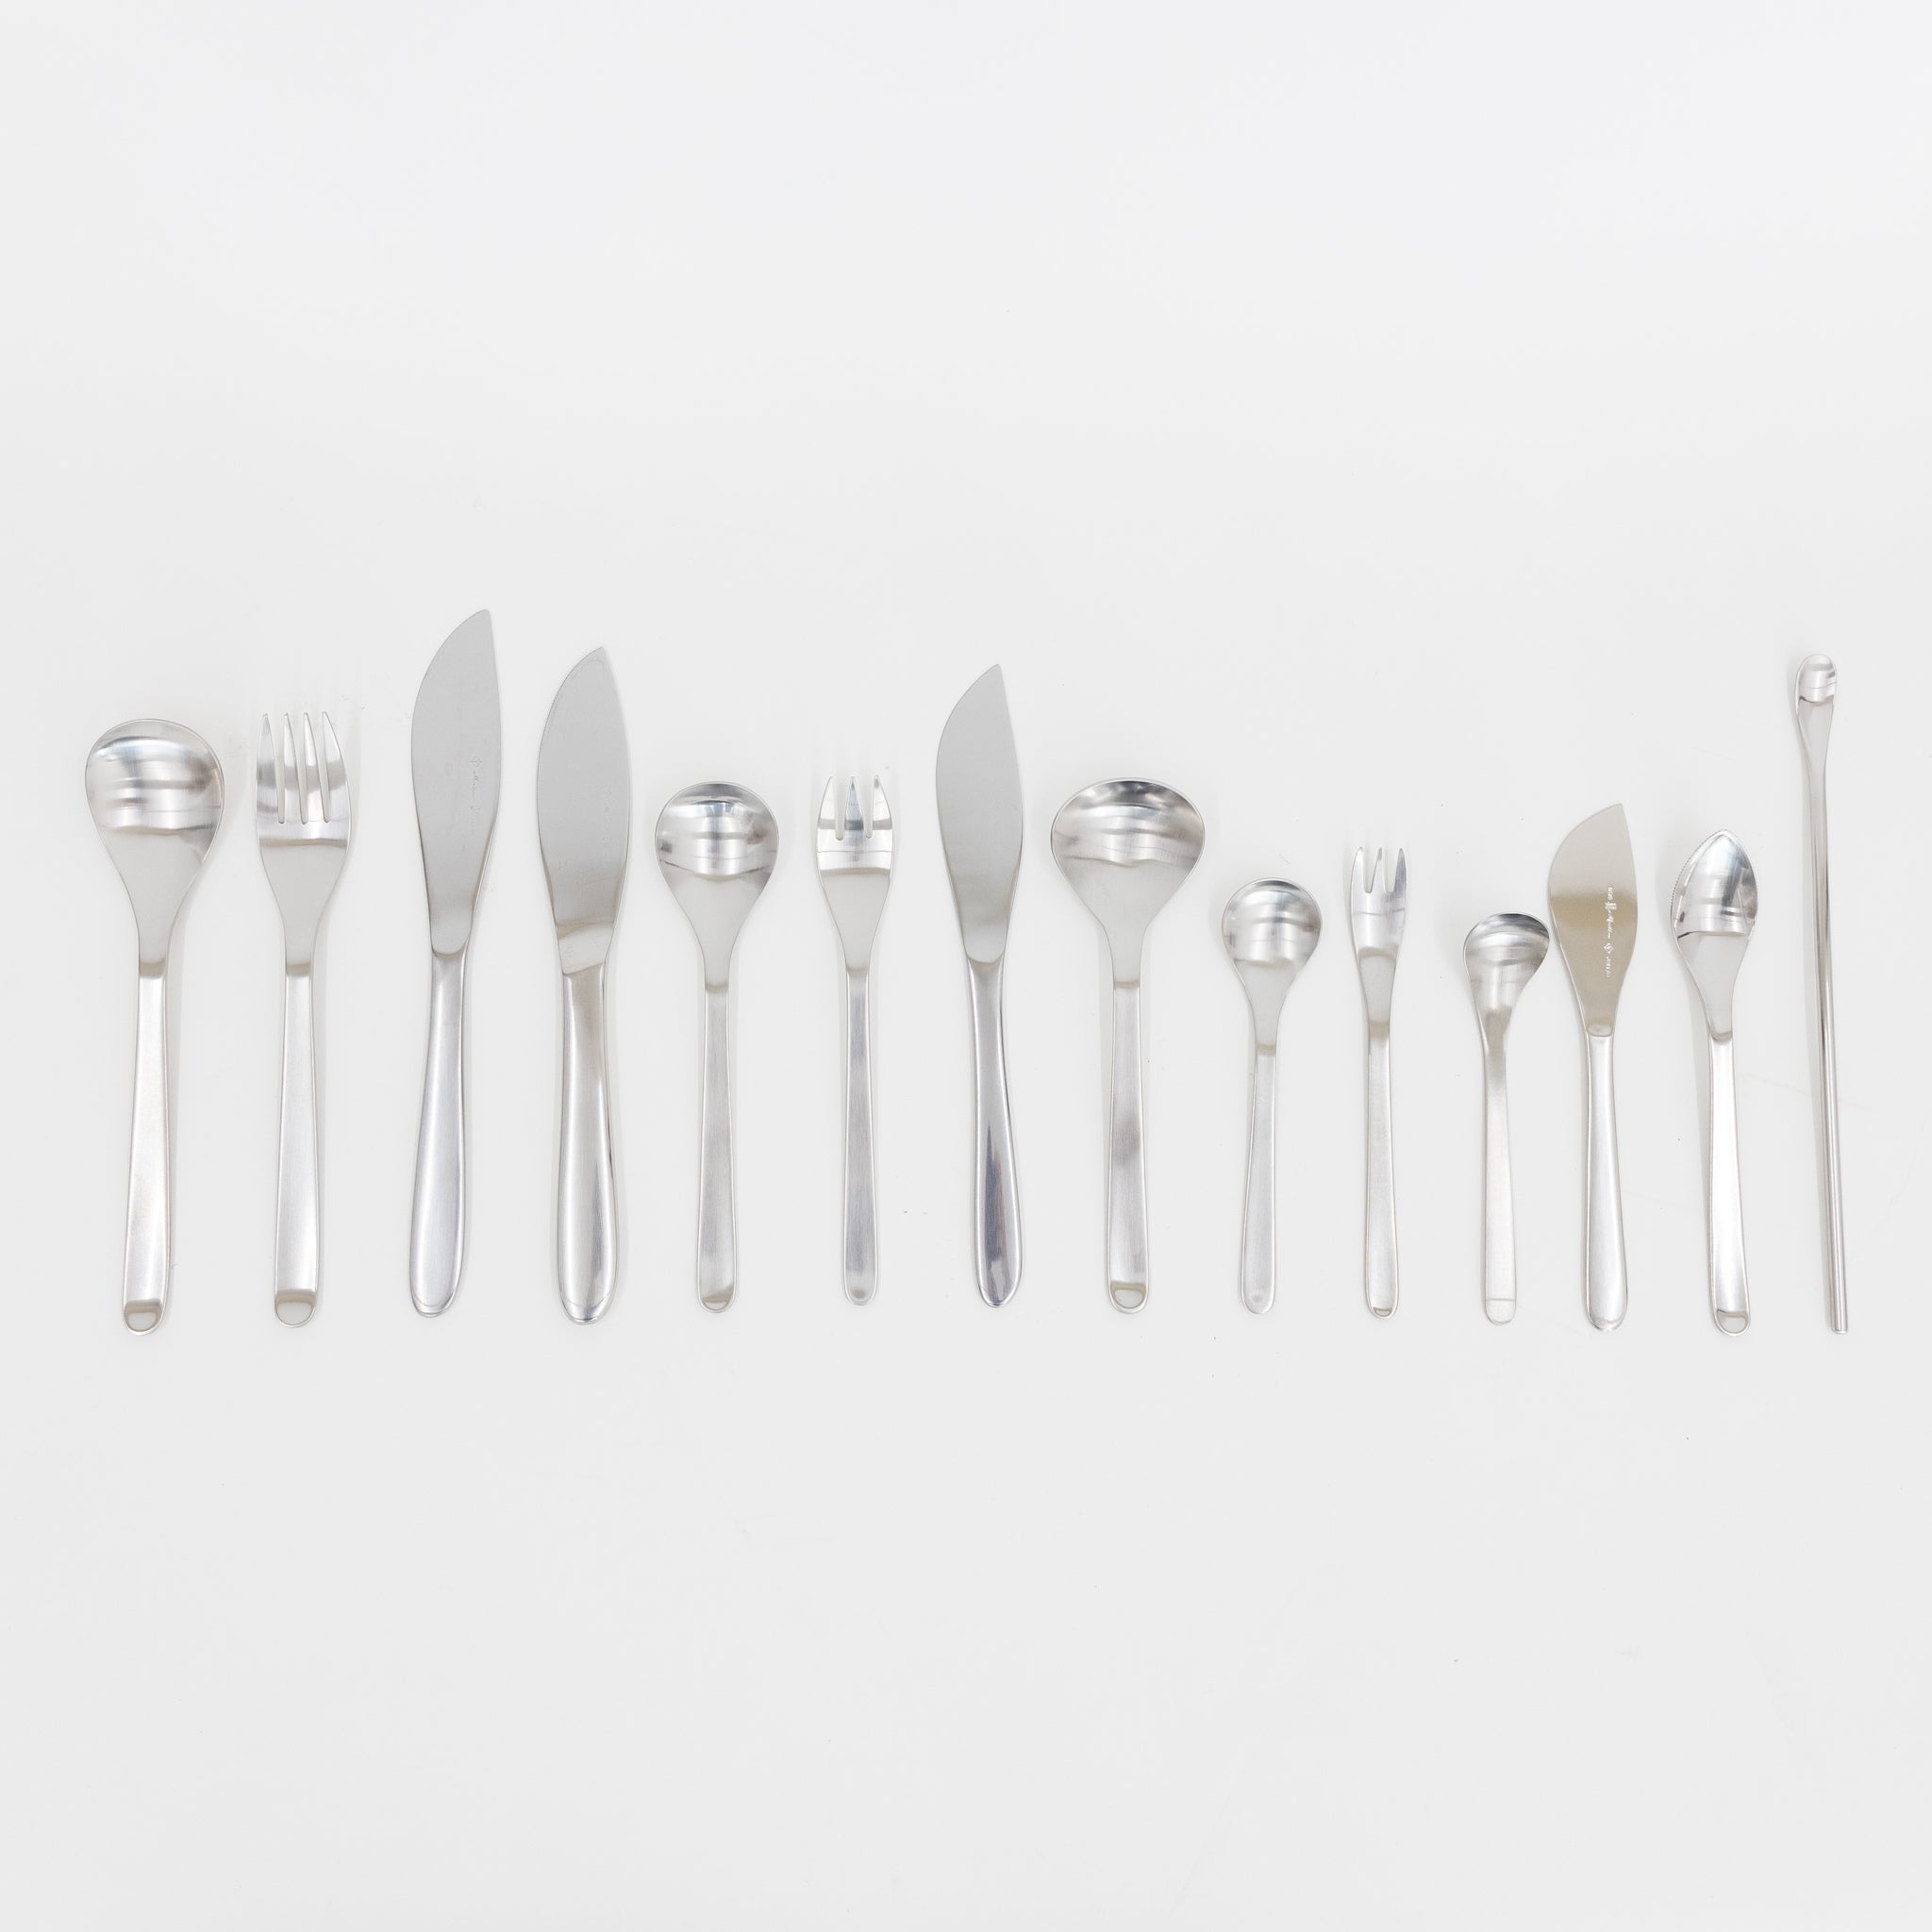 STAINLESS STEEL 6 PC. SMALL KITCHEN TOOL SET by Sori Yanagi